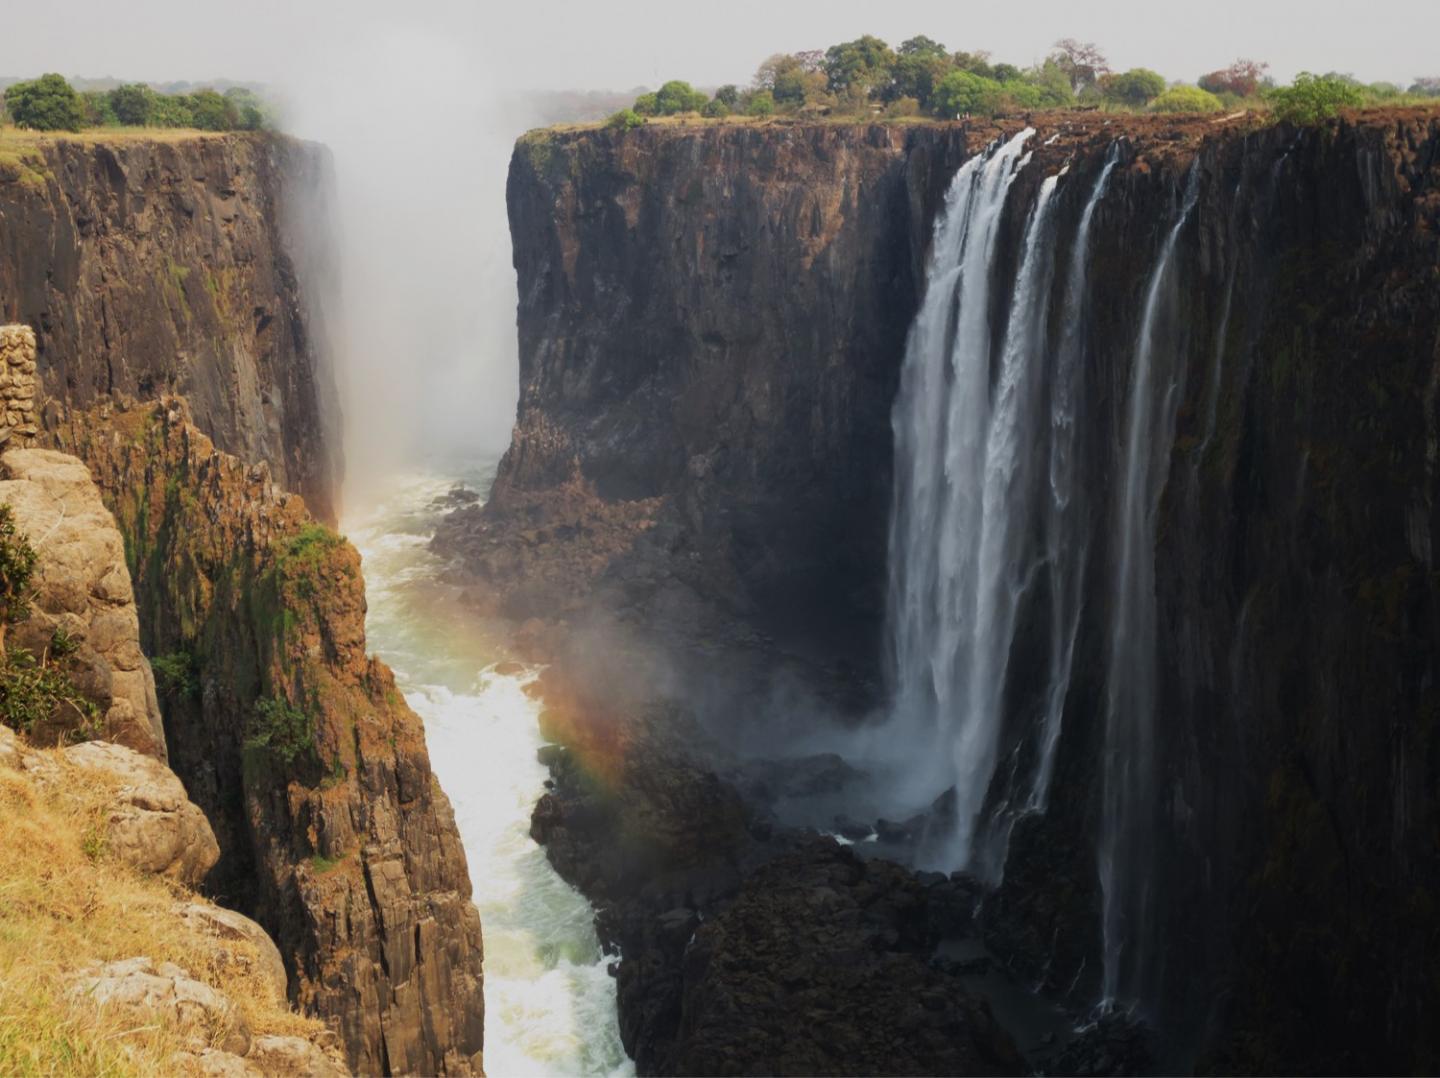 Lava Layers of the Karoo Magma Province Are Found at the Victoria Falls